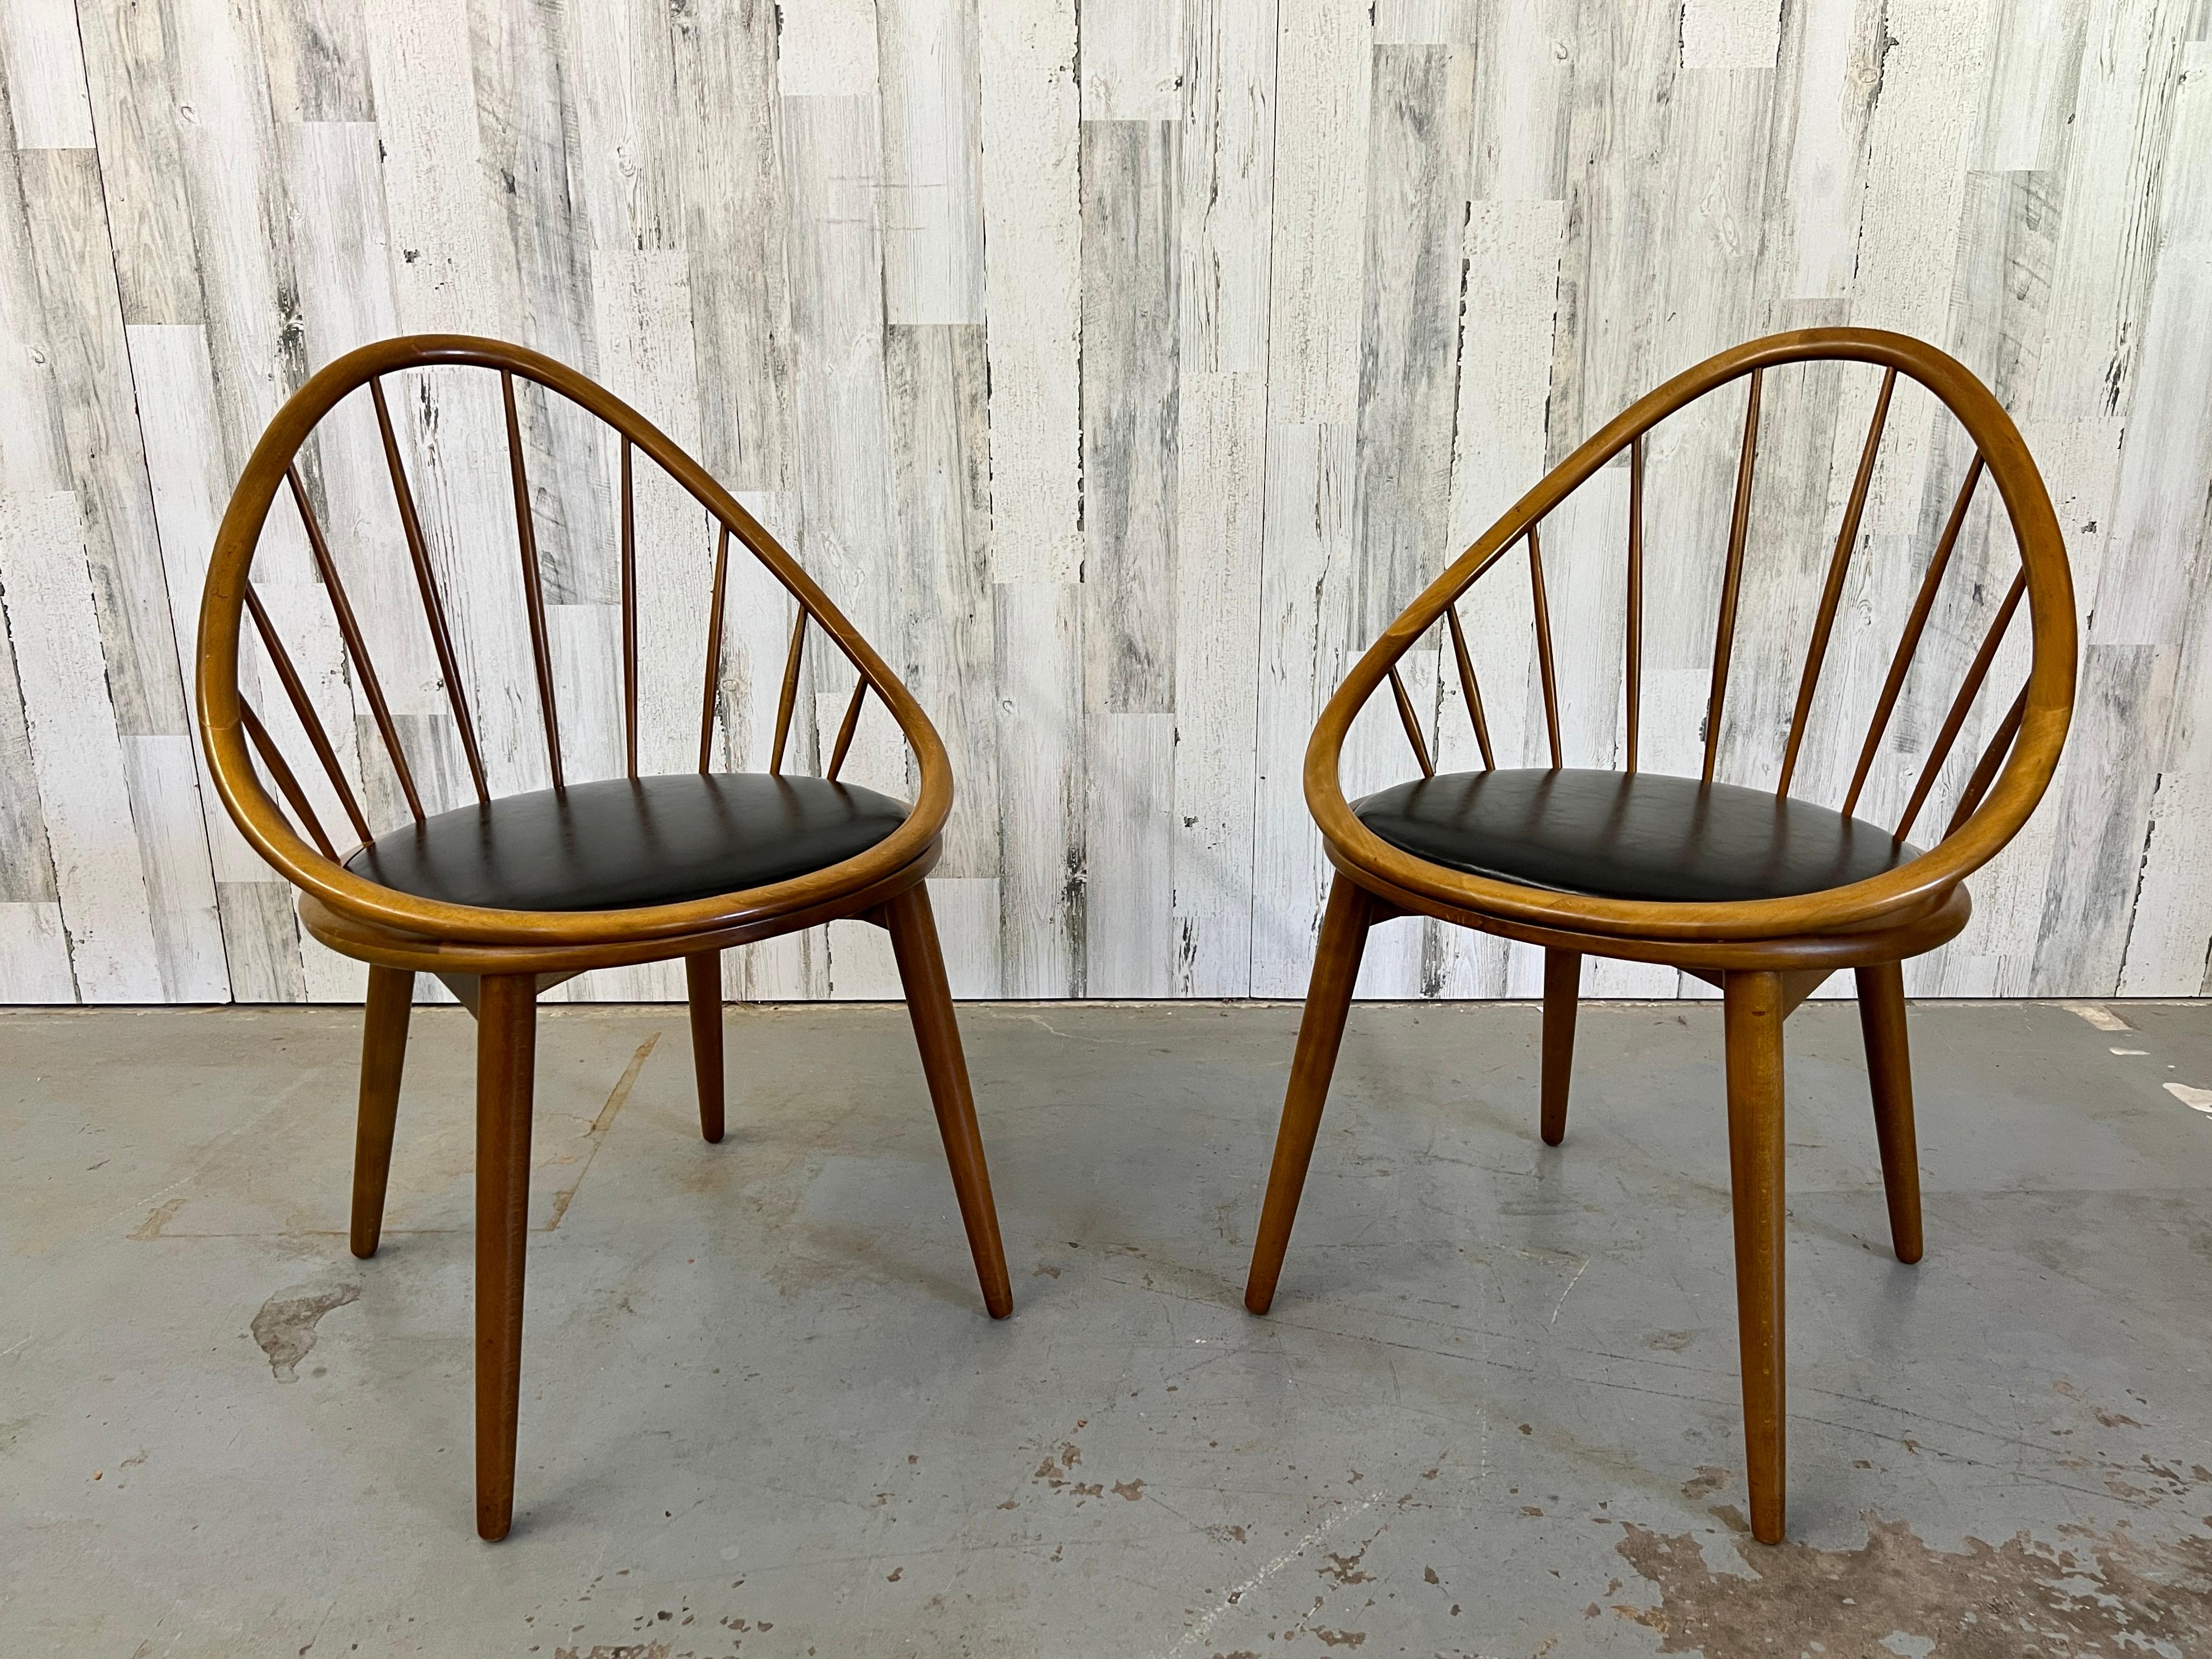 Danish Modern Petit Hoop Chairs In Good Condition For Sale In Denton, TX